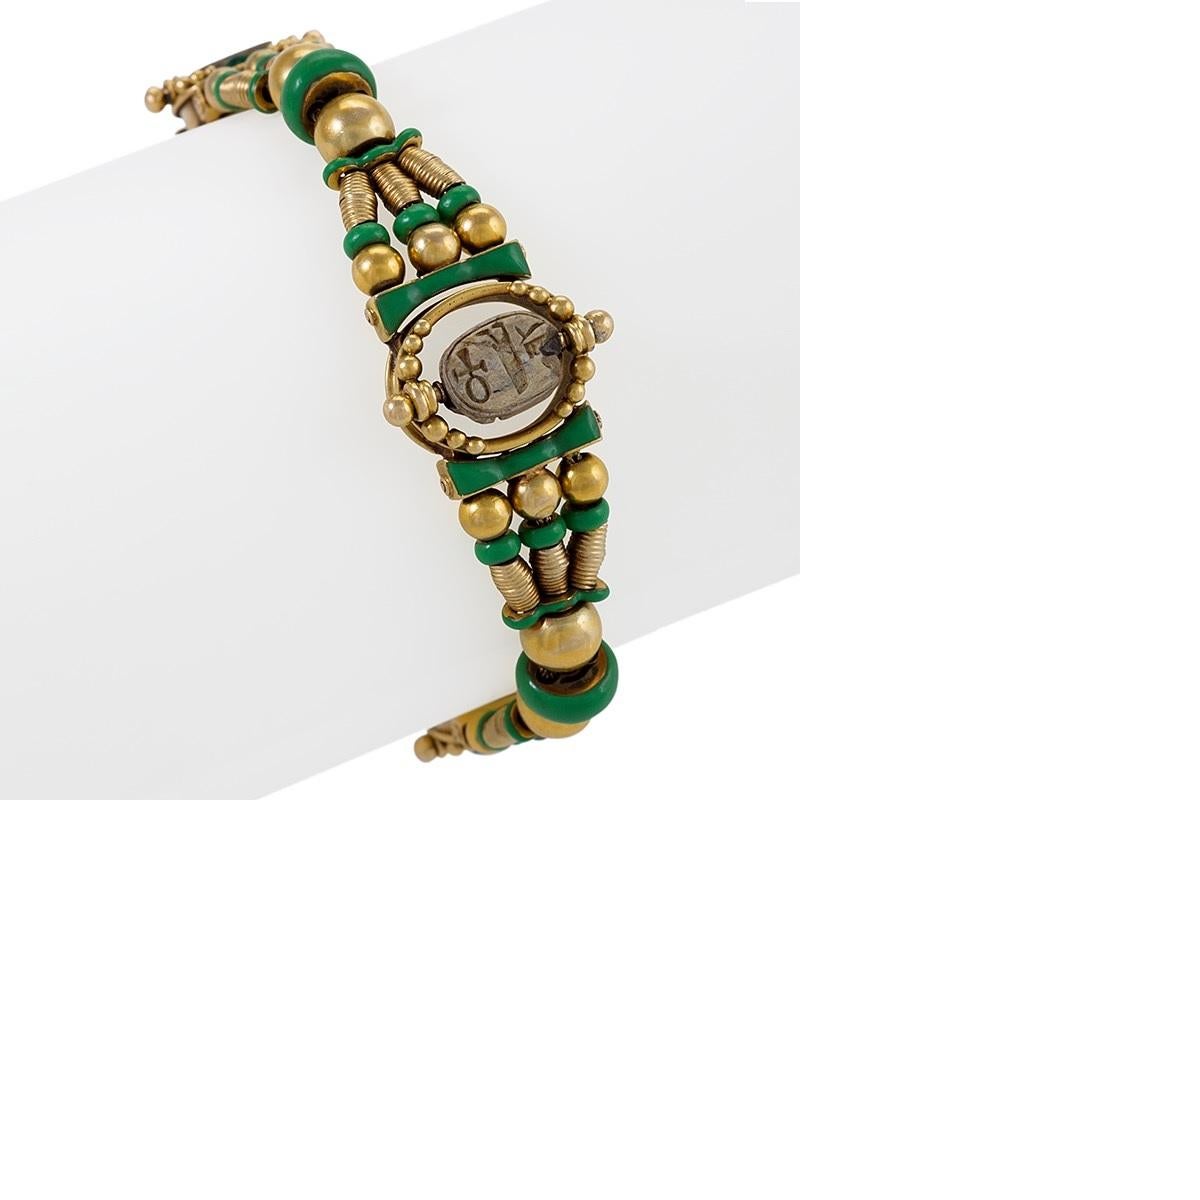 An Egyptian Revival bracelet, circa 1860, in 18 karat gold with green enamel framing and beads. The bracelet features three faience scarabs; two smaller, flanking insects in teal, and one large scarab in earthen tones at the center of the piece.